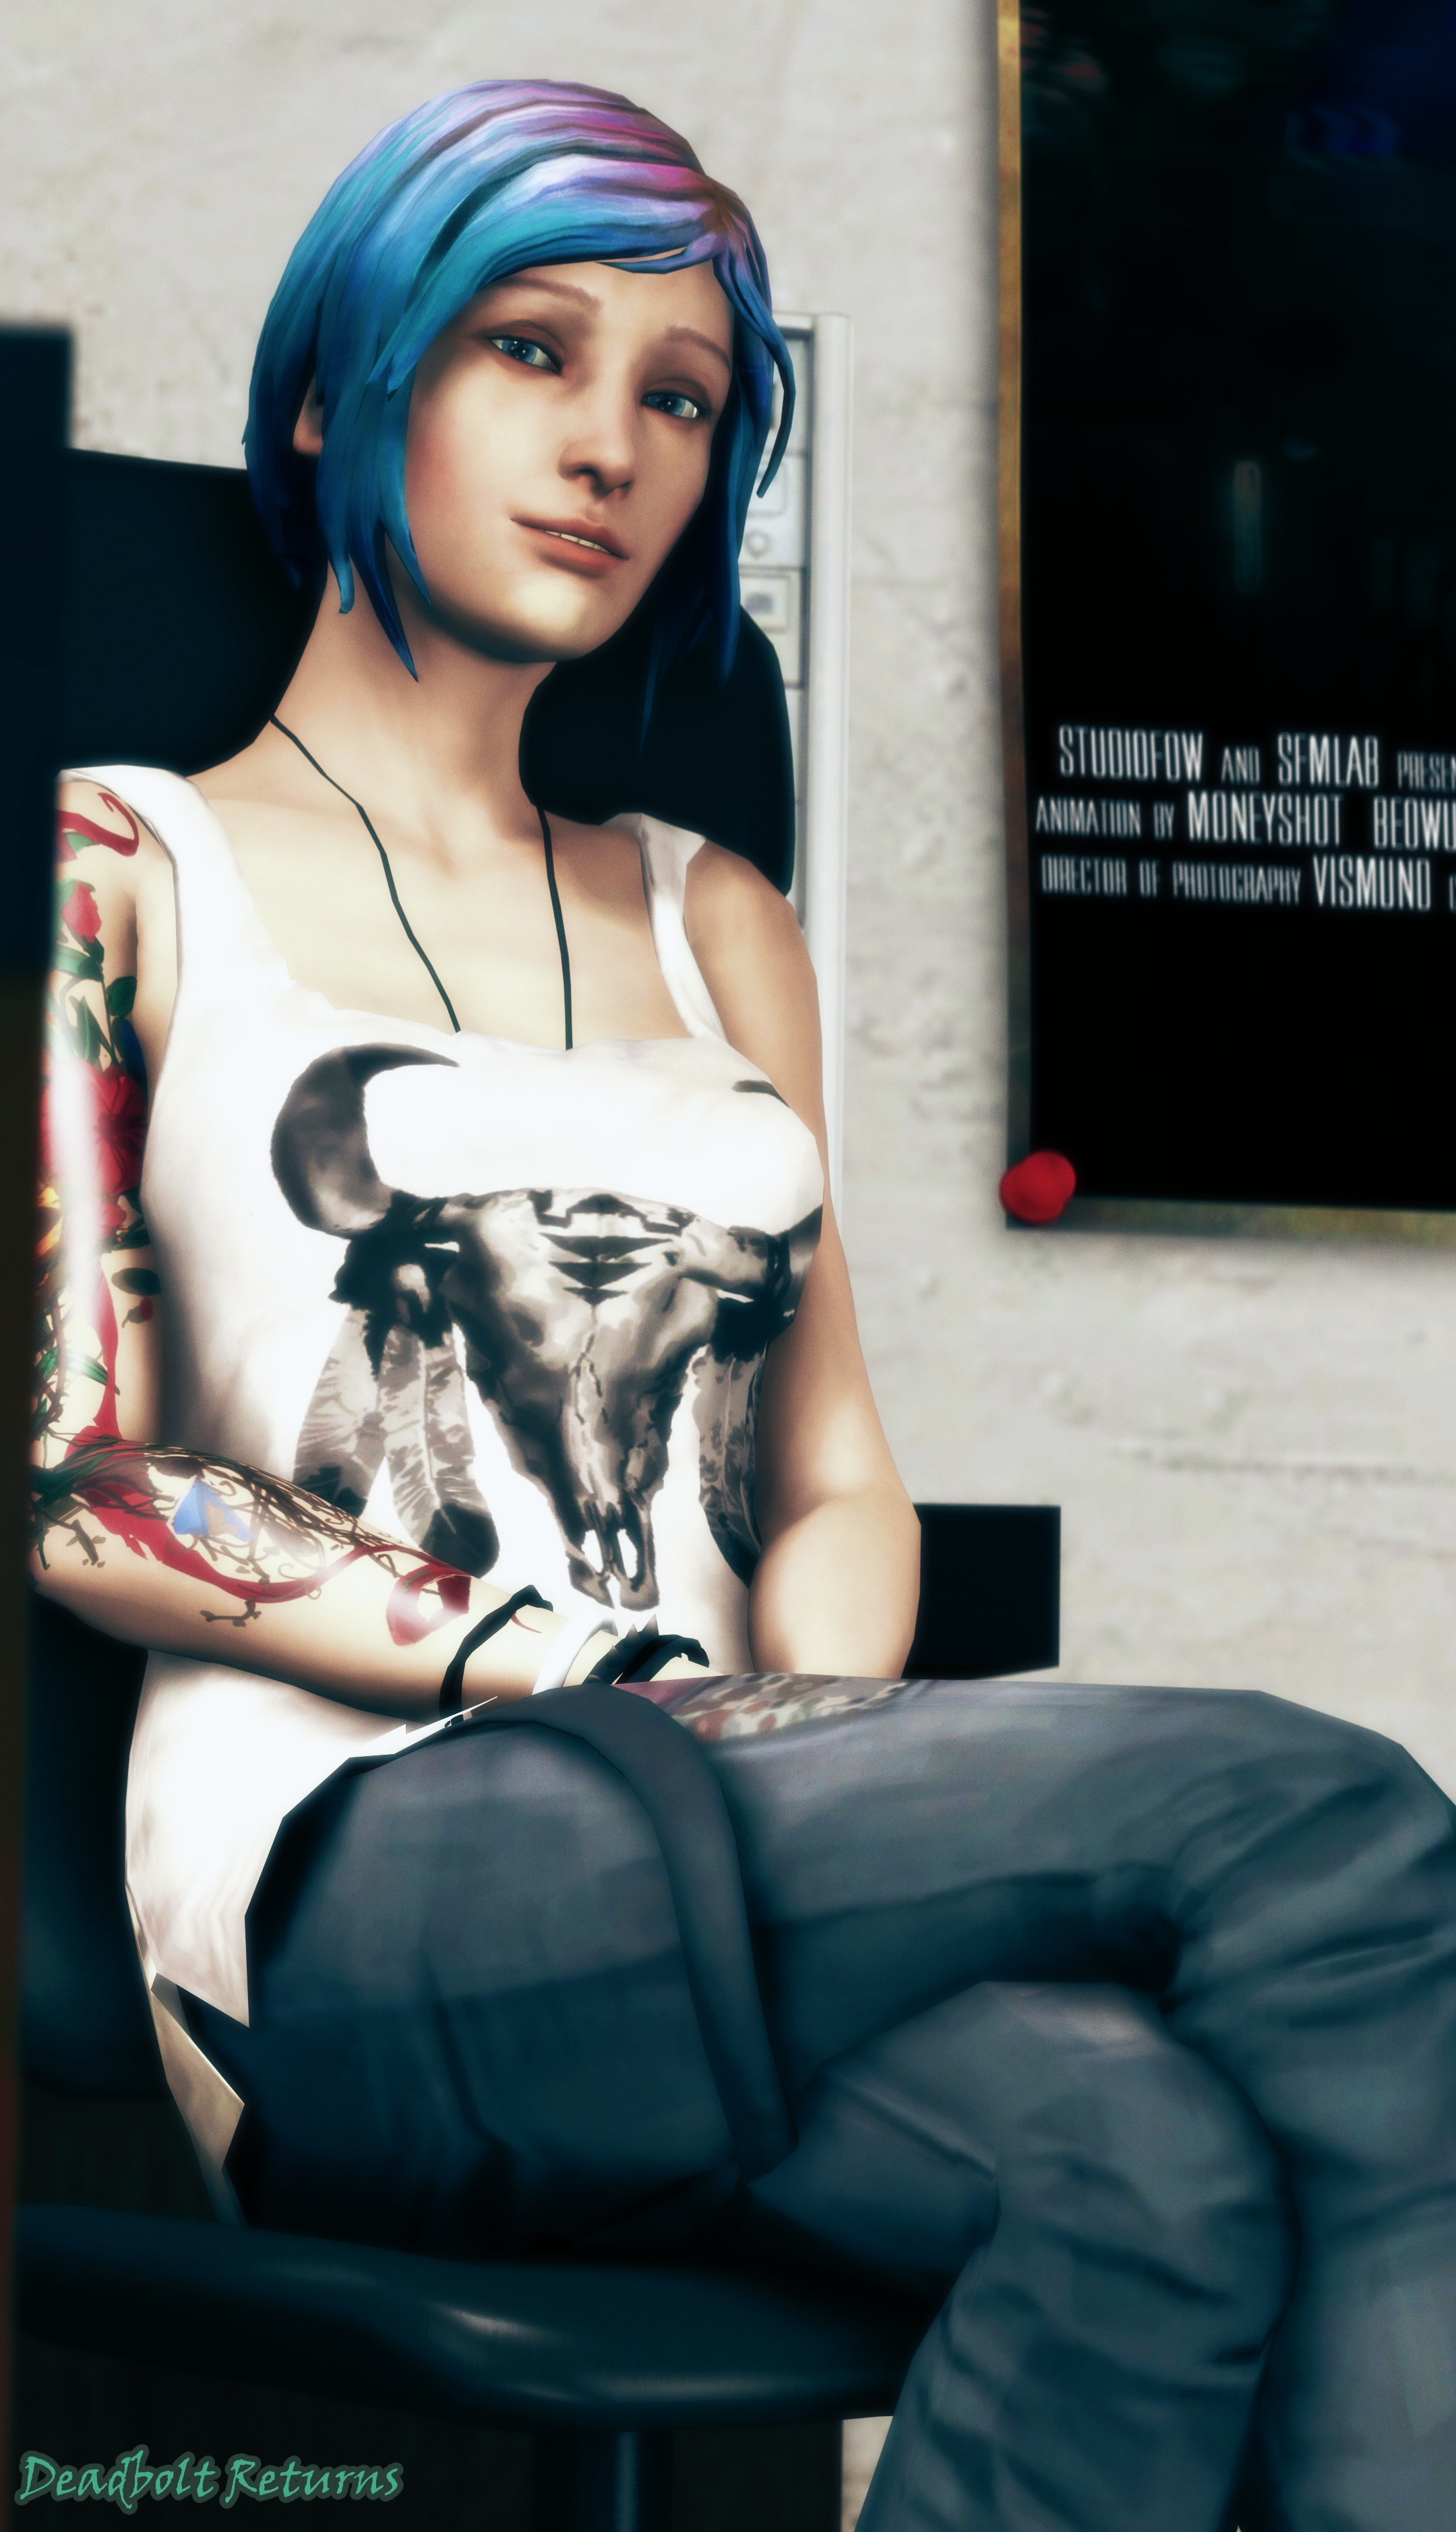 Chloe Price Returns to the Casting Couch Chloe Price Chloe Life Is Strange Sfm Source Filmmaker Rule34 Rule 34 3d Porn 3d Girl 3dnsfw Nsfw Casting Couch